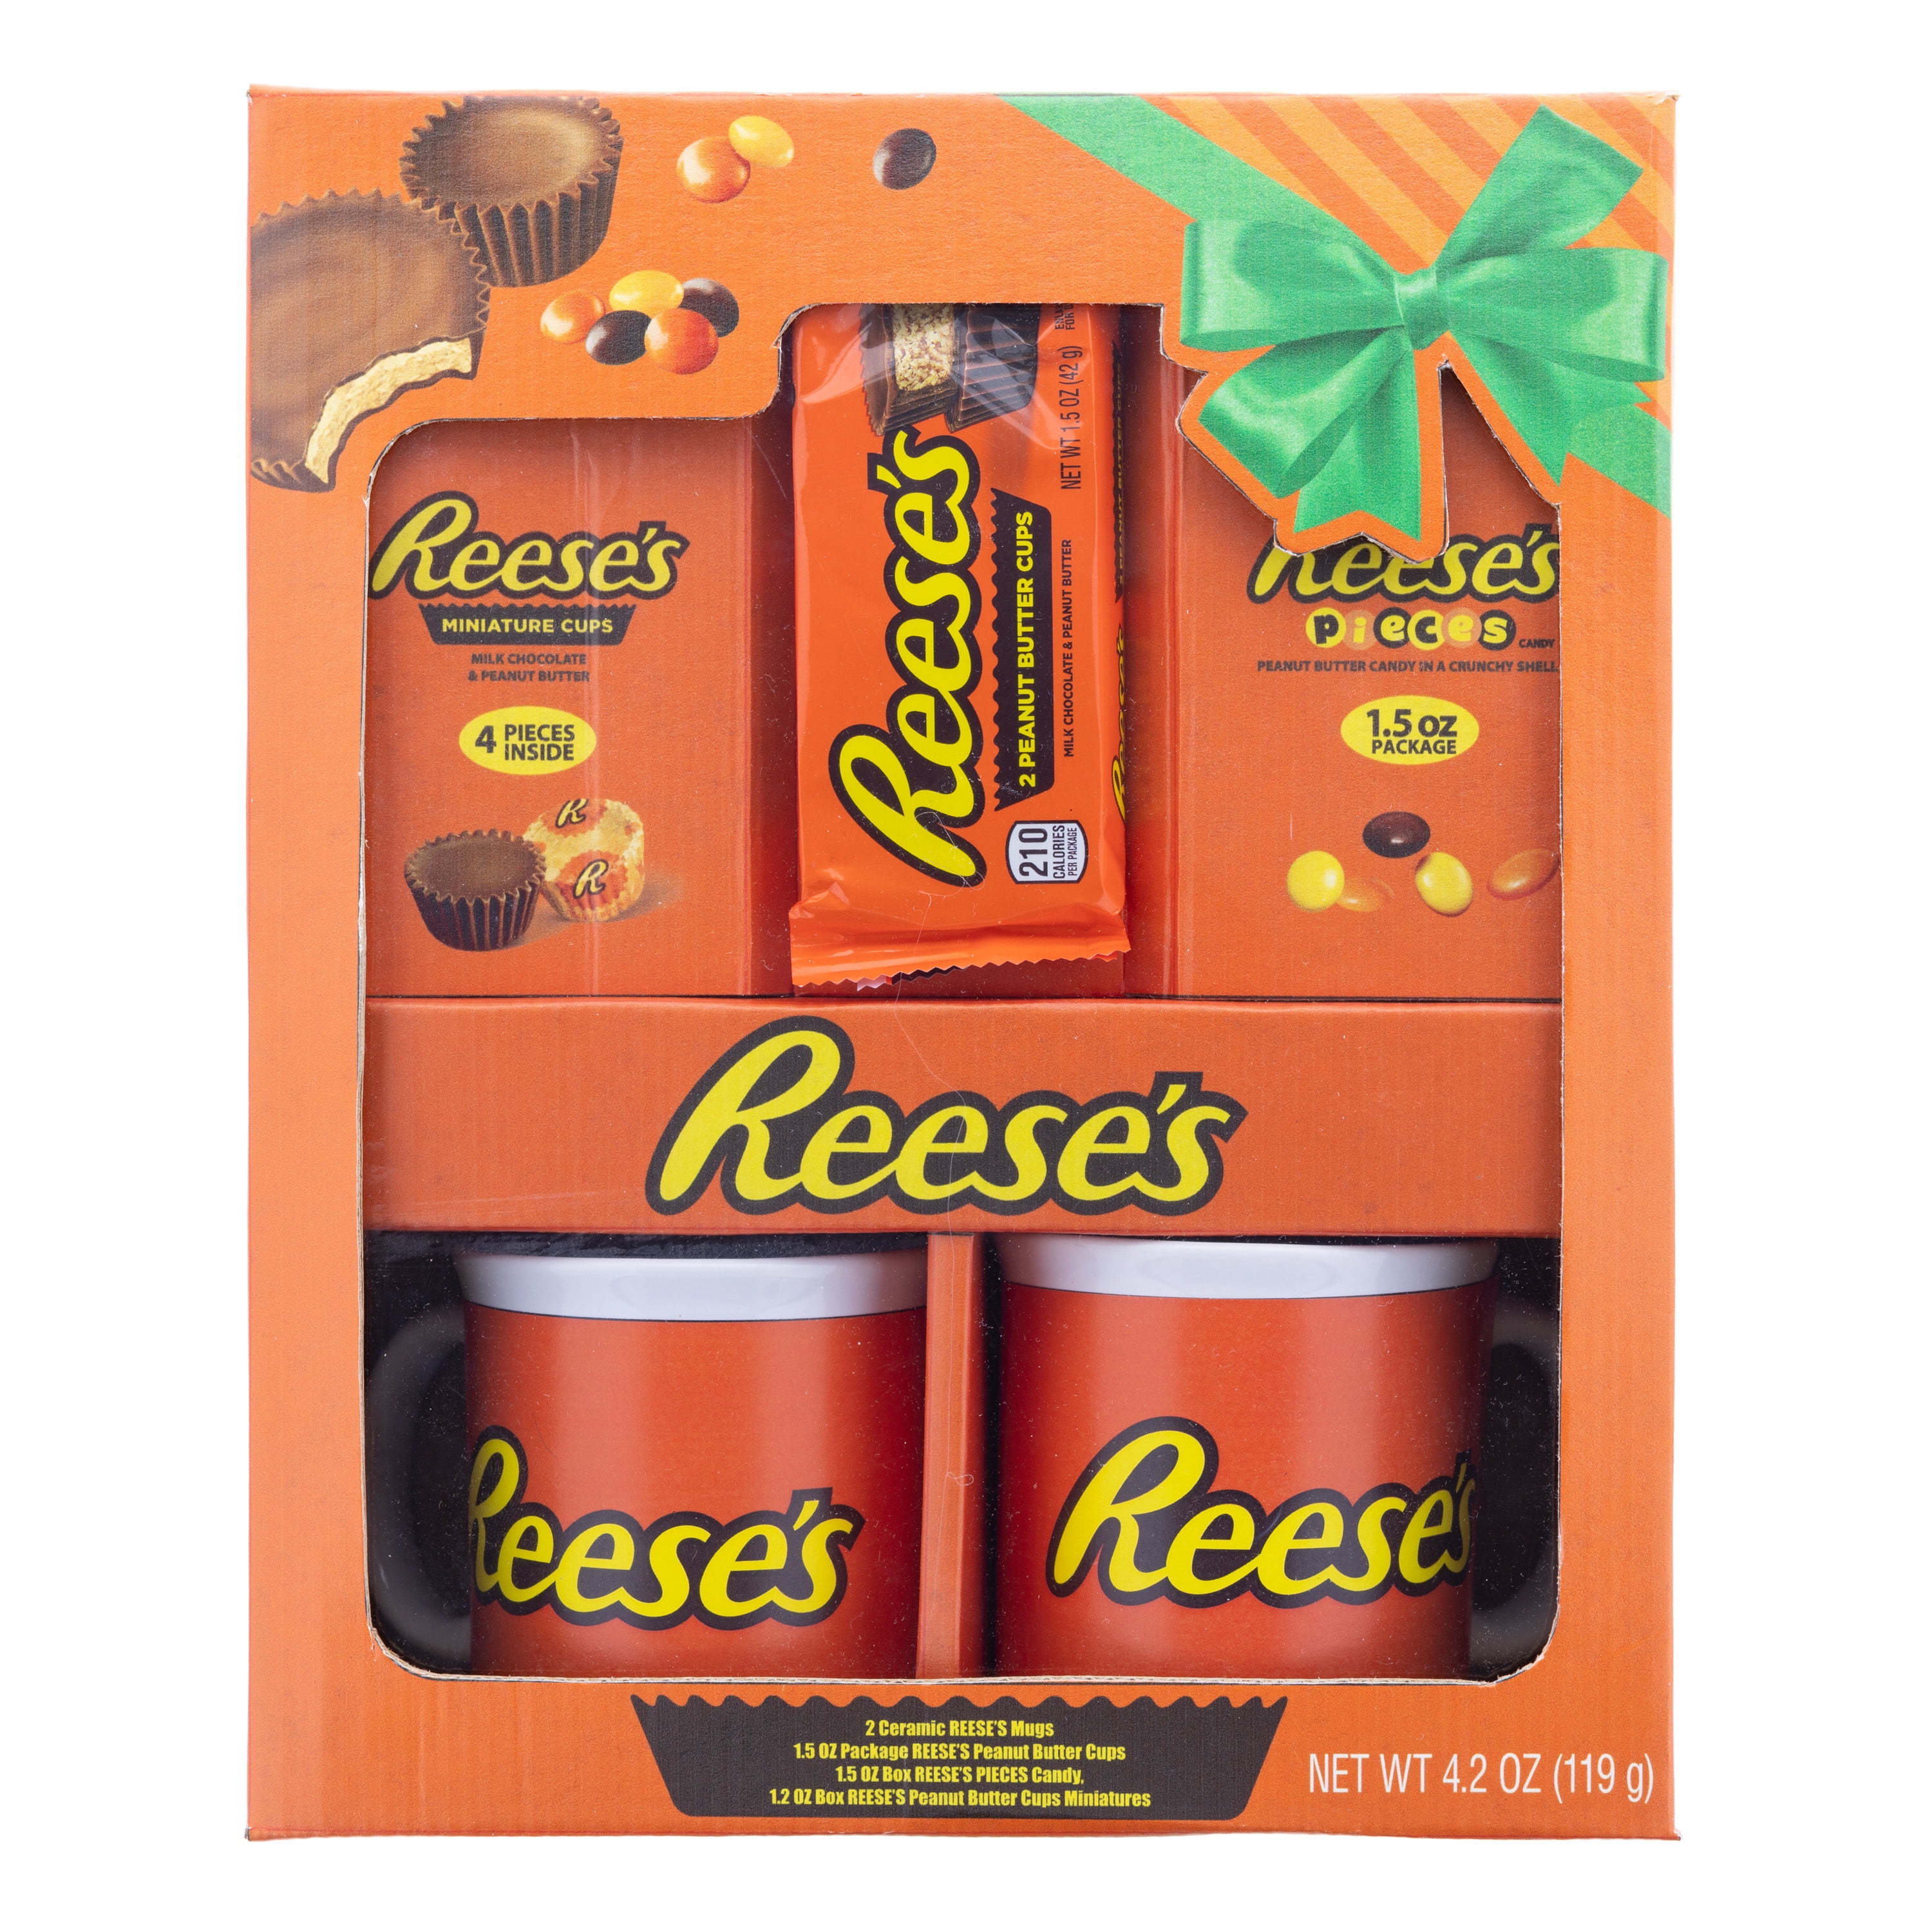 Galerie Hershey Reese's Lovers 2 Count Mug Gift Set with Chocolate. 4.2 oz